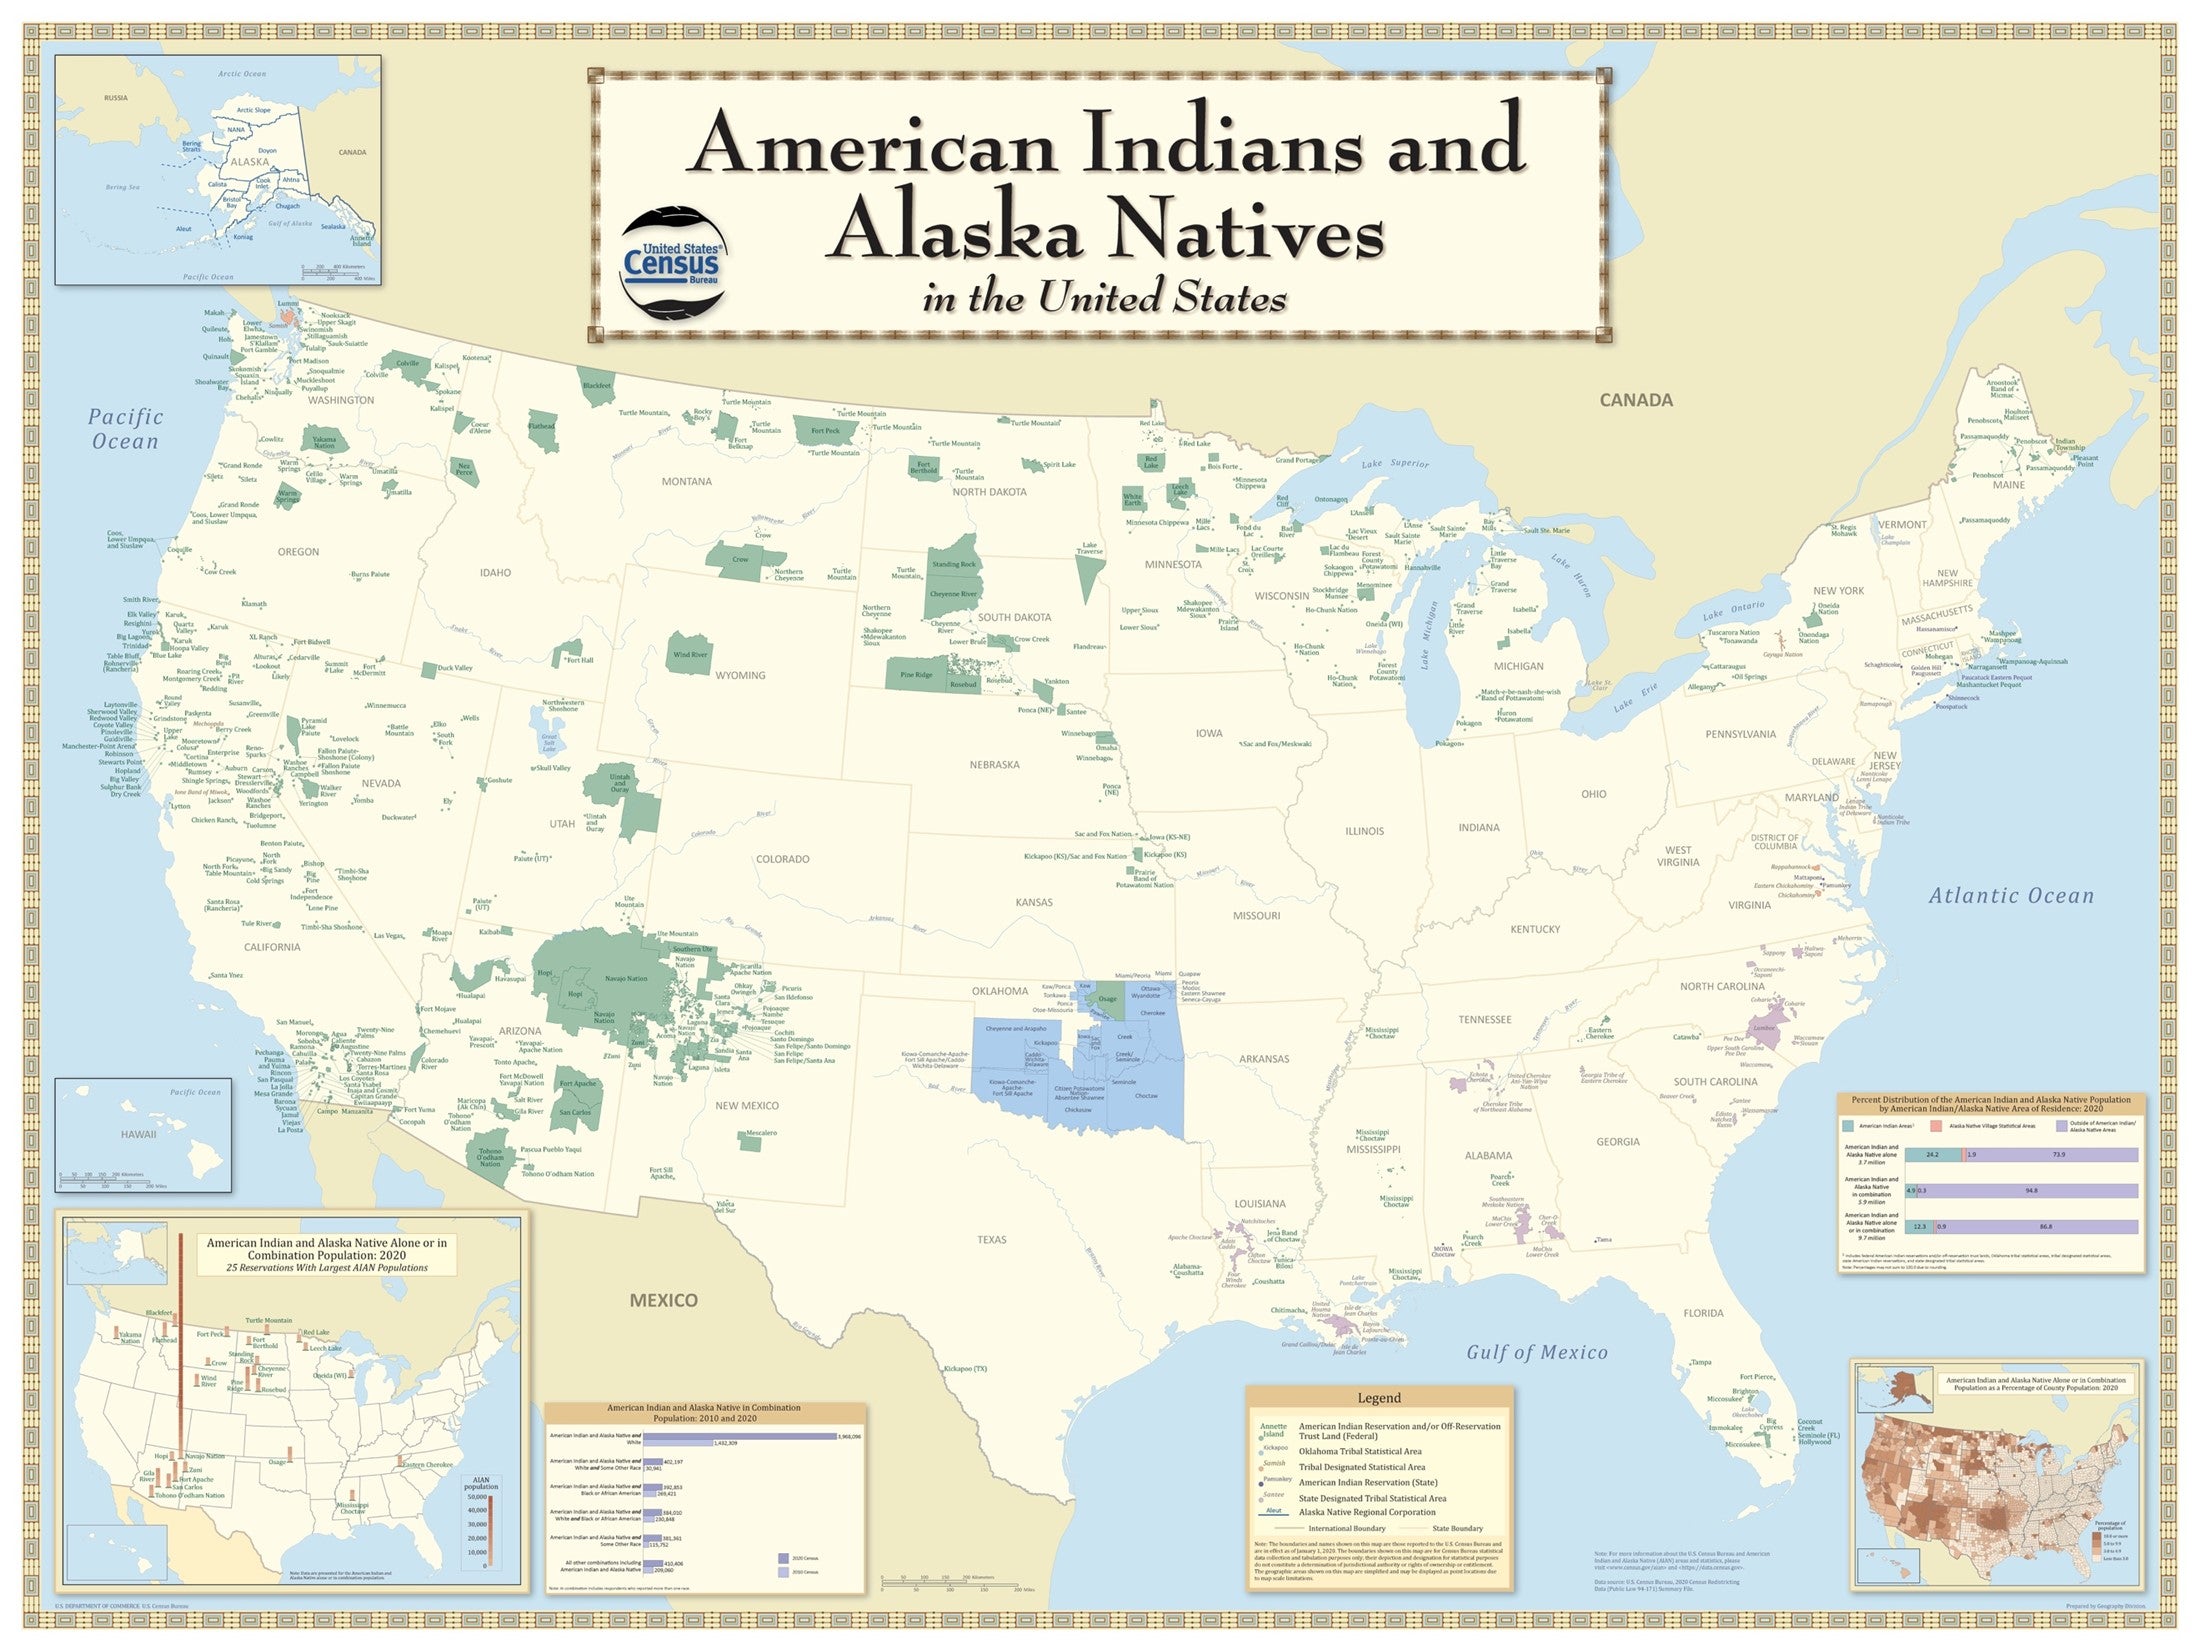 Map of American Indian Alaska Native reservations